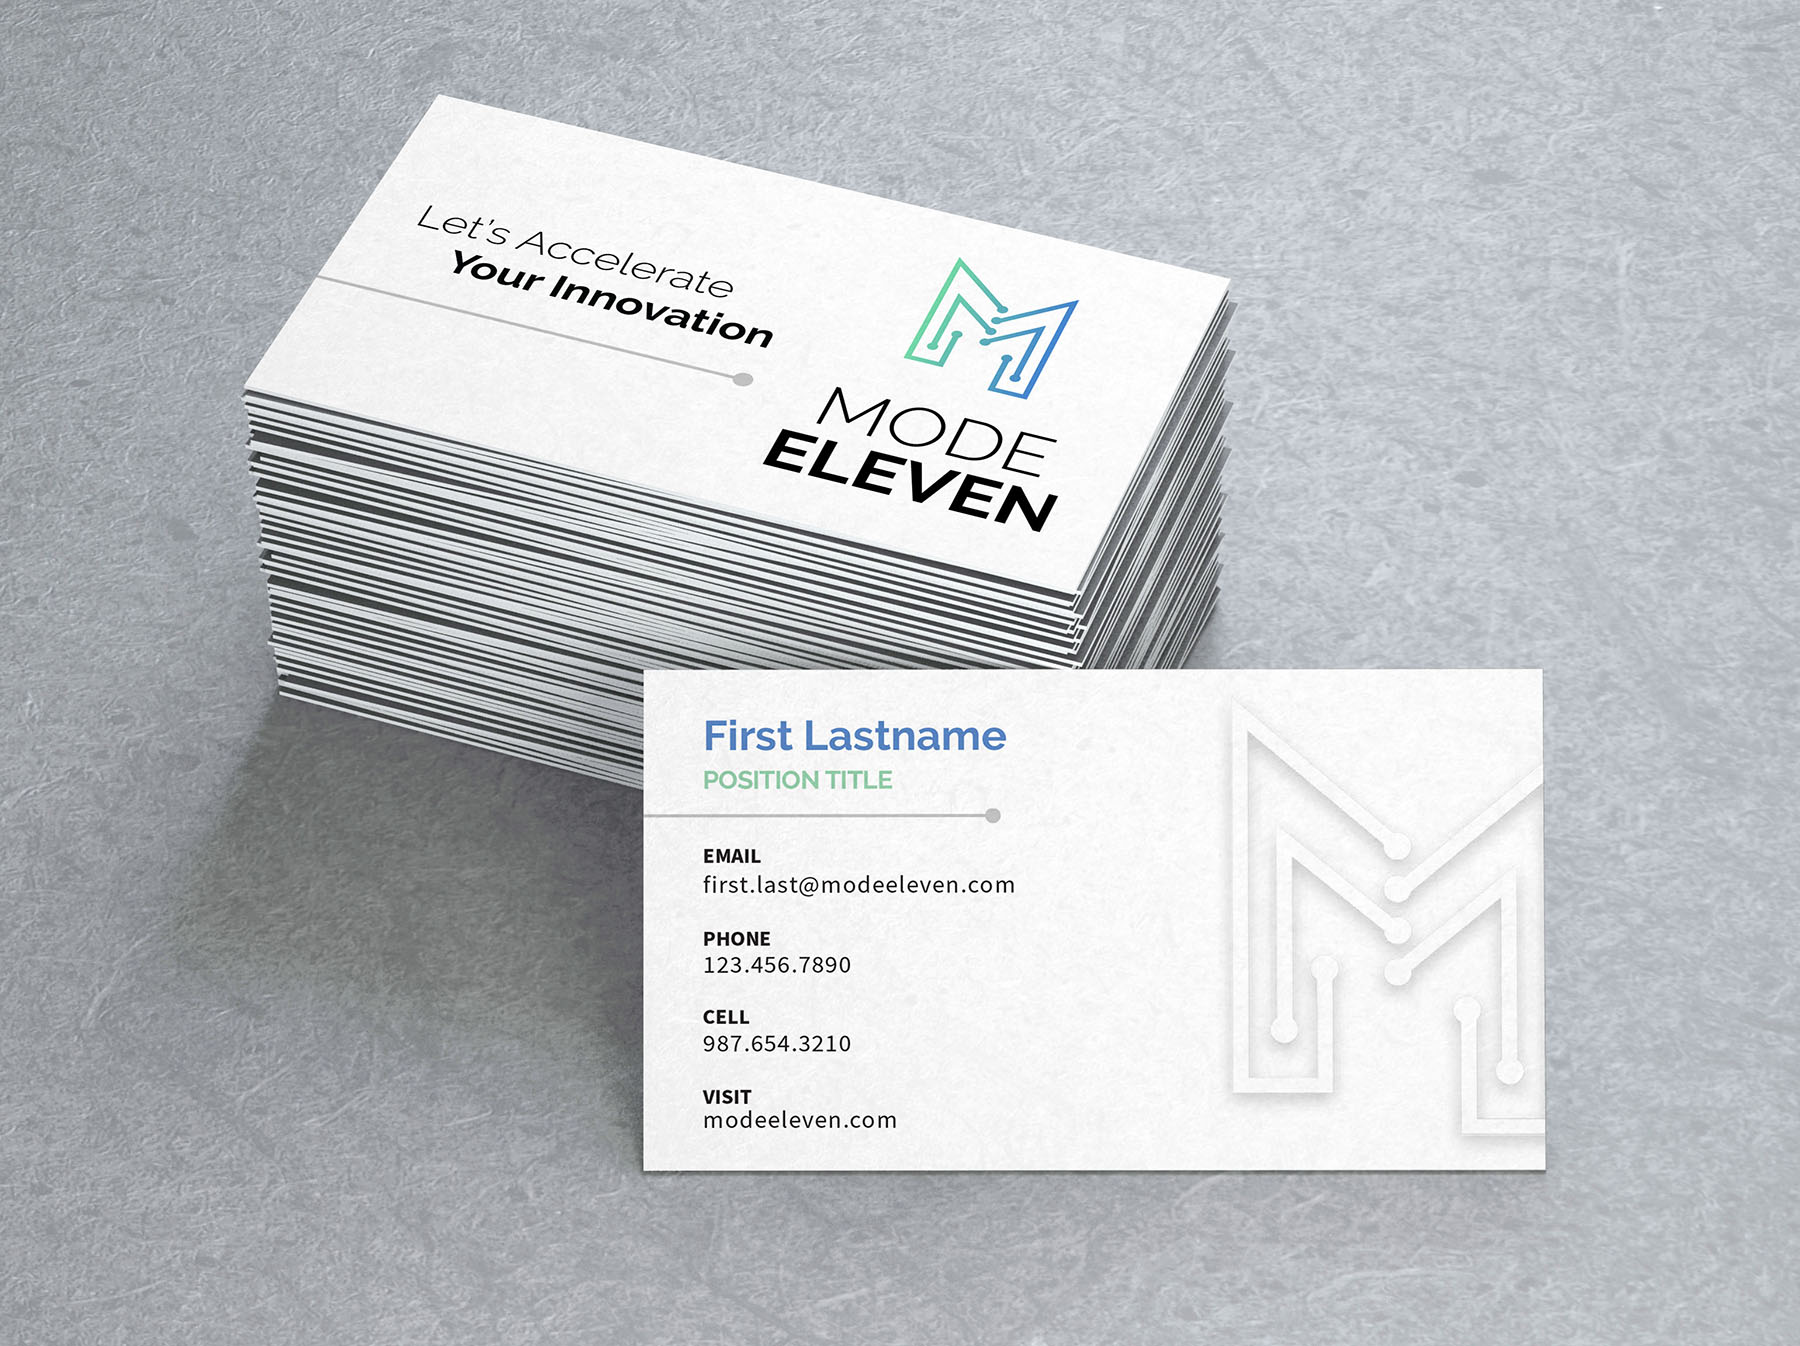 Mode Eleven business cards